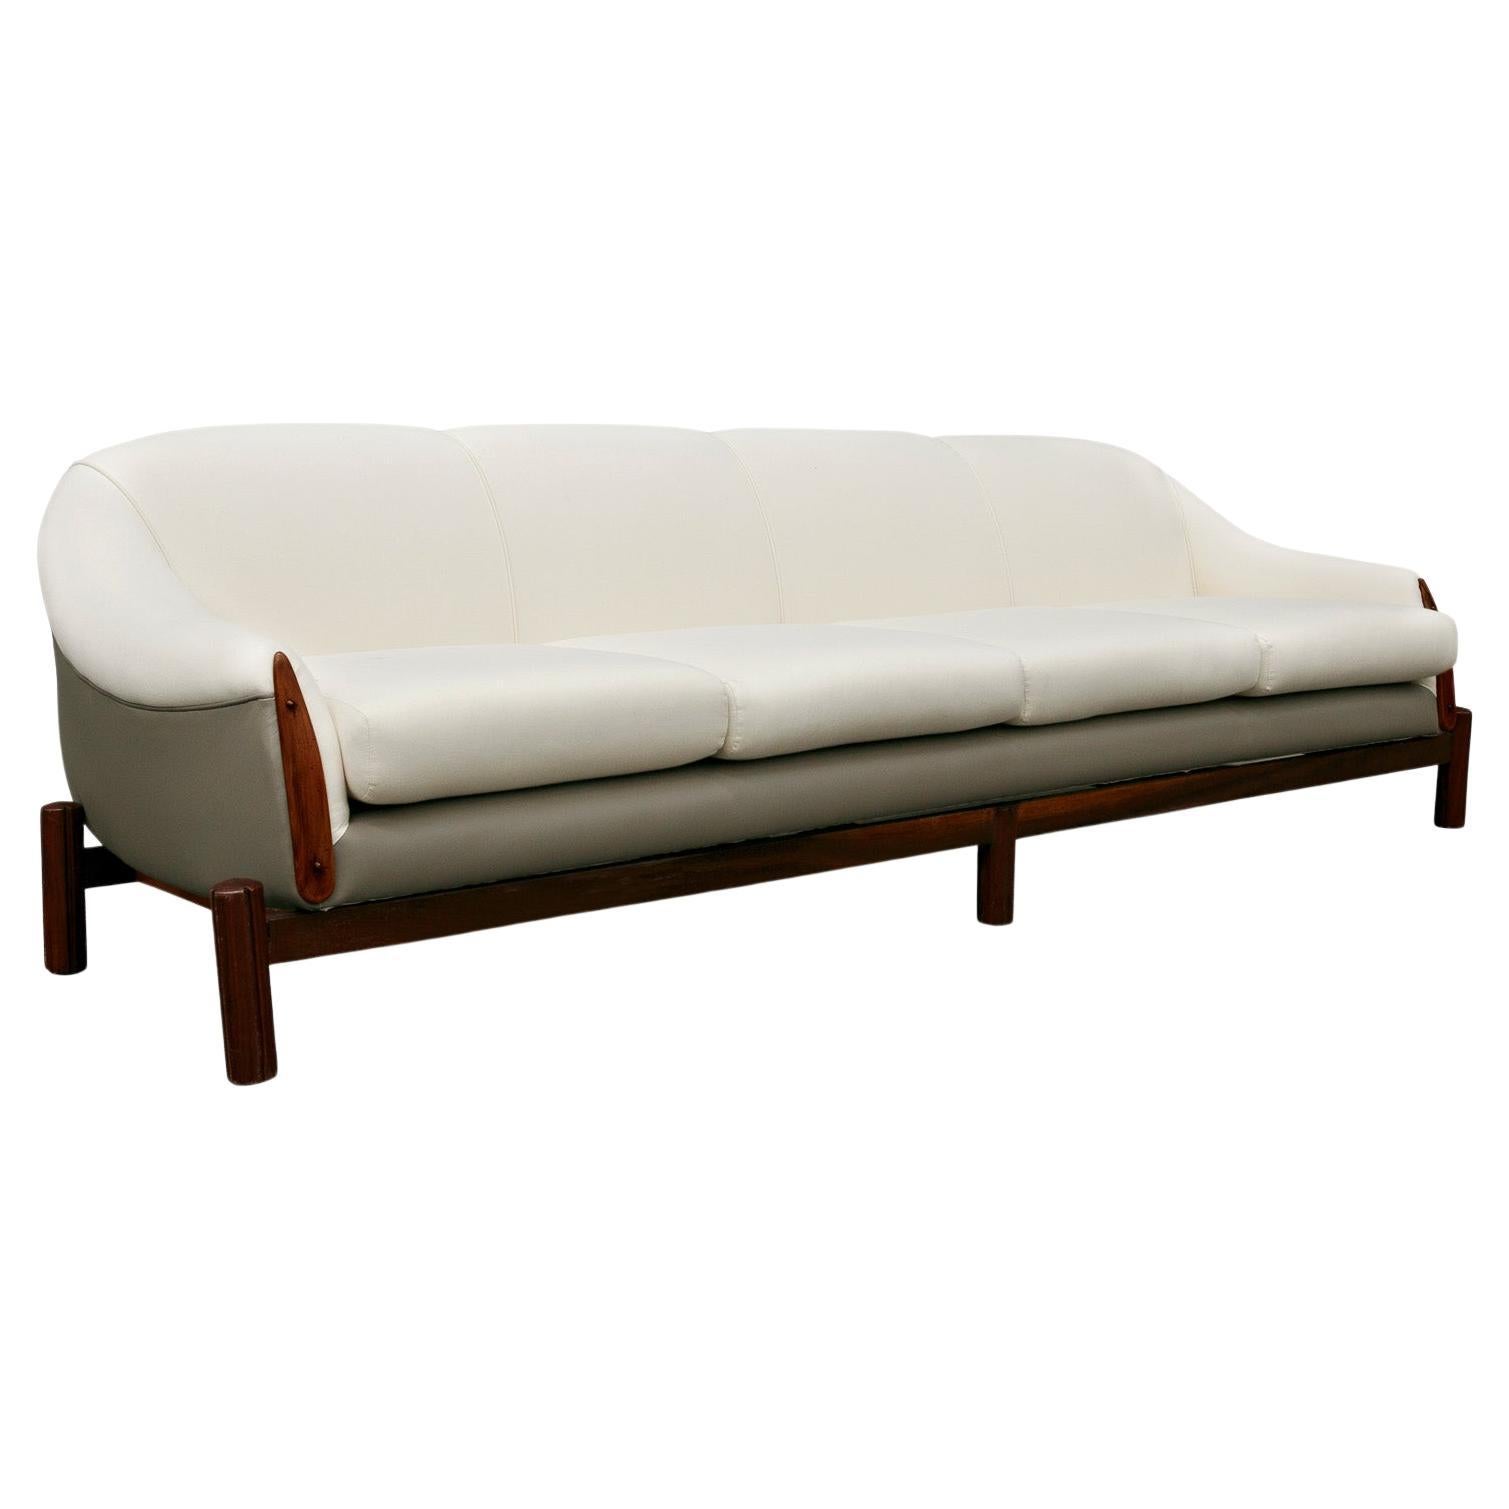 Available today, this Brazilian Modern sofa in hardwood, grey leather, and white fabric by Cimo, 1960s is simply fantastic!

This spectacular Sofa fits four very comfortably and features a Brazilian Rosewood (as known as Jacaranda) base with five